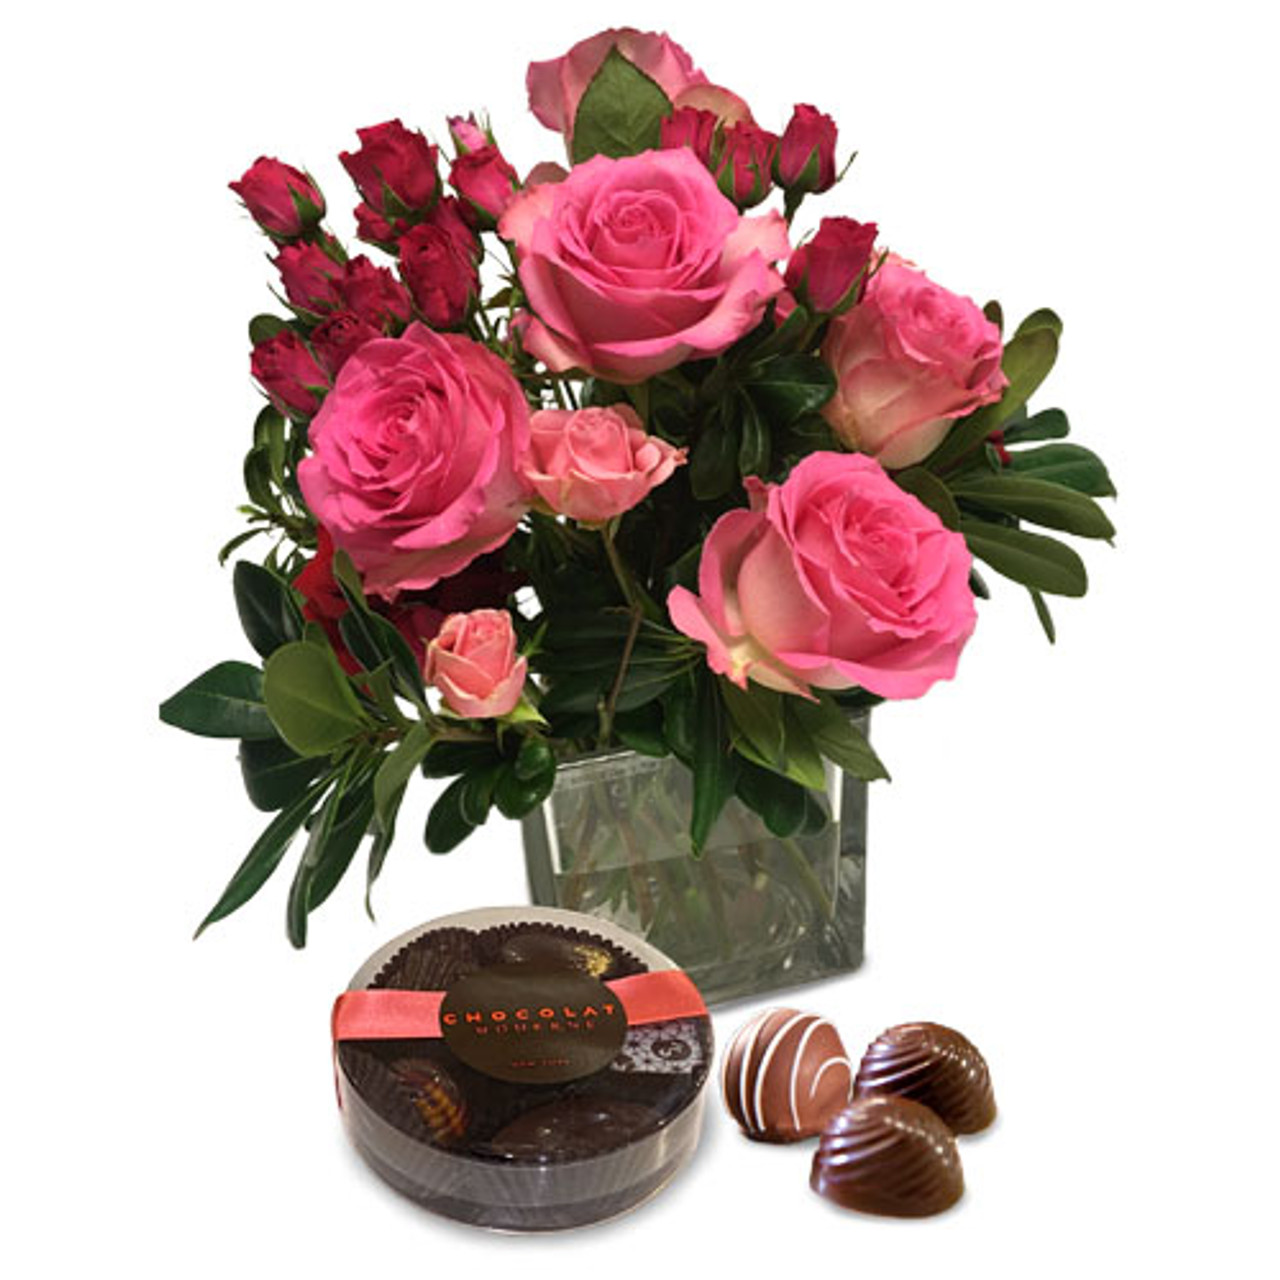 Duo of Luxe Chocolates and Pink Roses